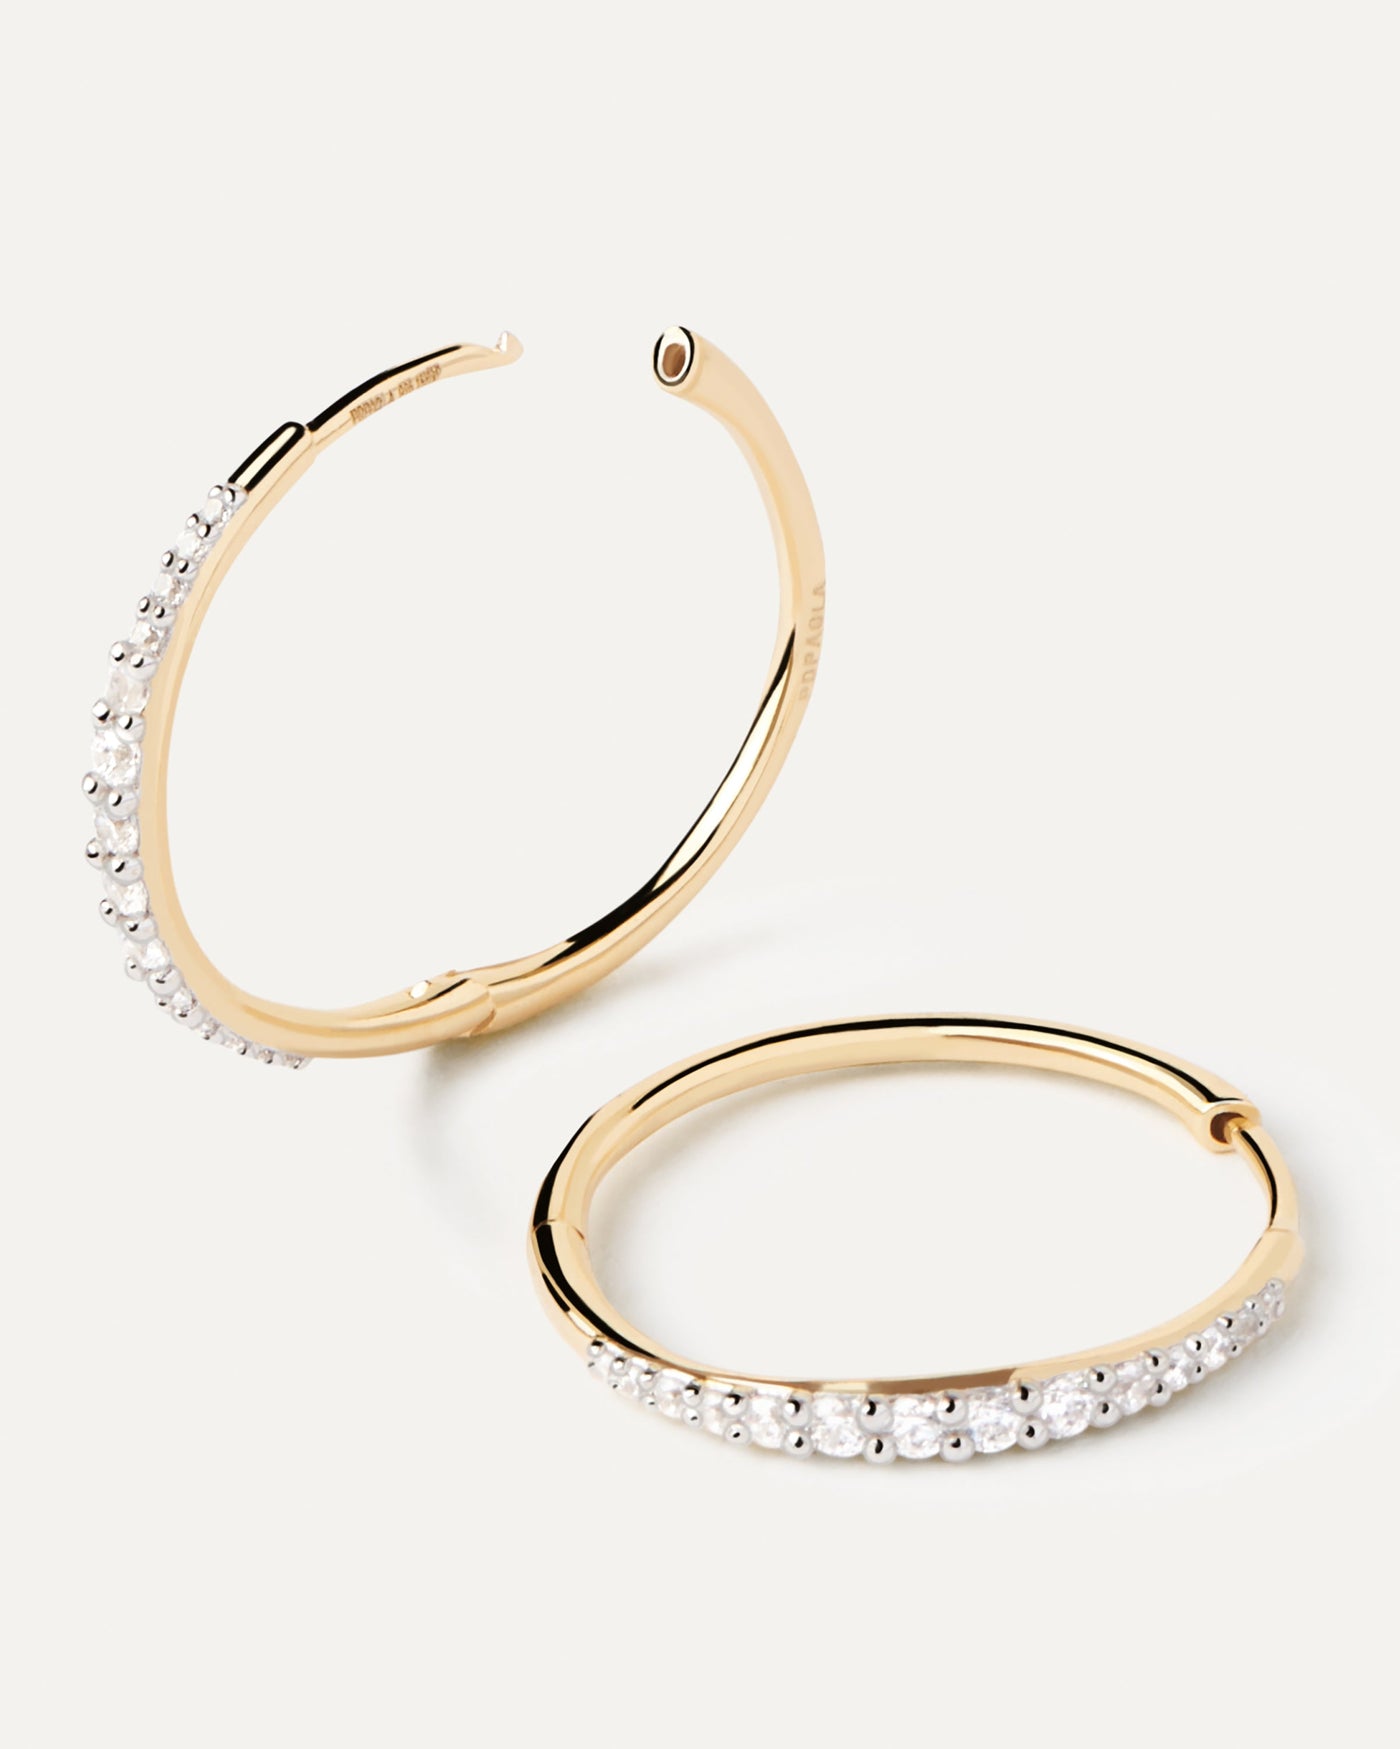 2023 Selection | Diamonds And Gold Estella Hoops. Slim hoop earrings in yellow gold with pavé diamonds of 0.37 carats. Get the latest arrival from PDPAOLA. Place your order safely and get this Best Seller. Free Shipping.